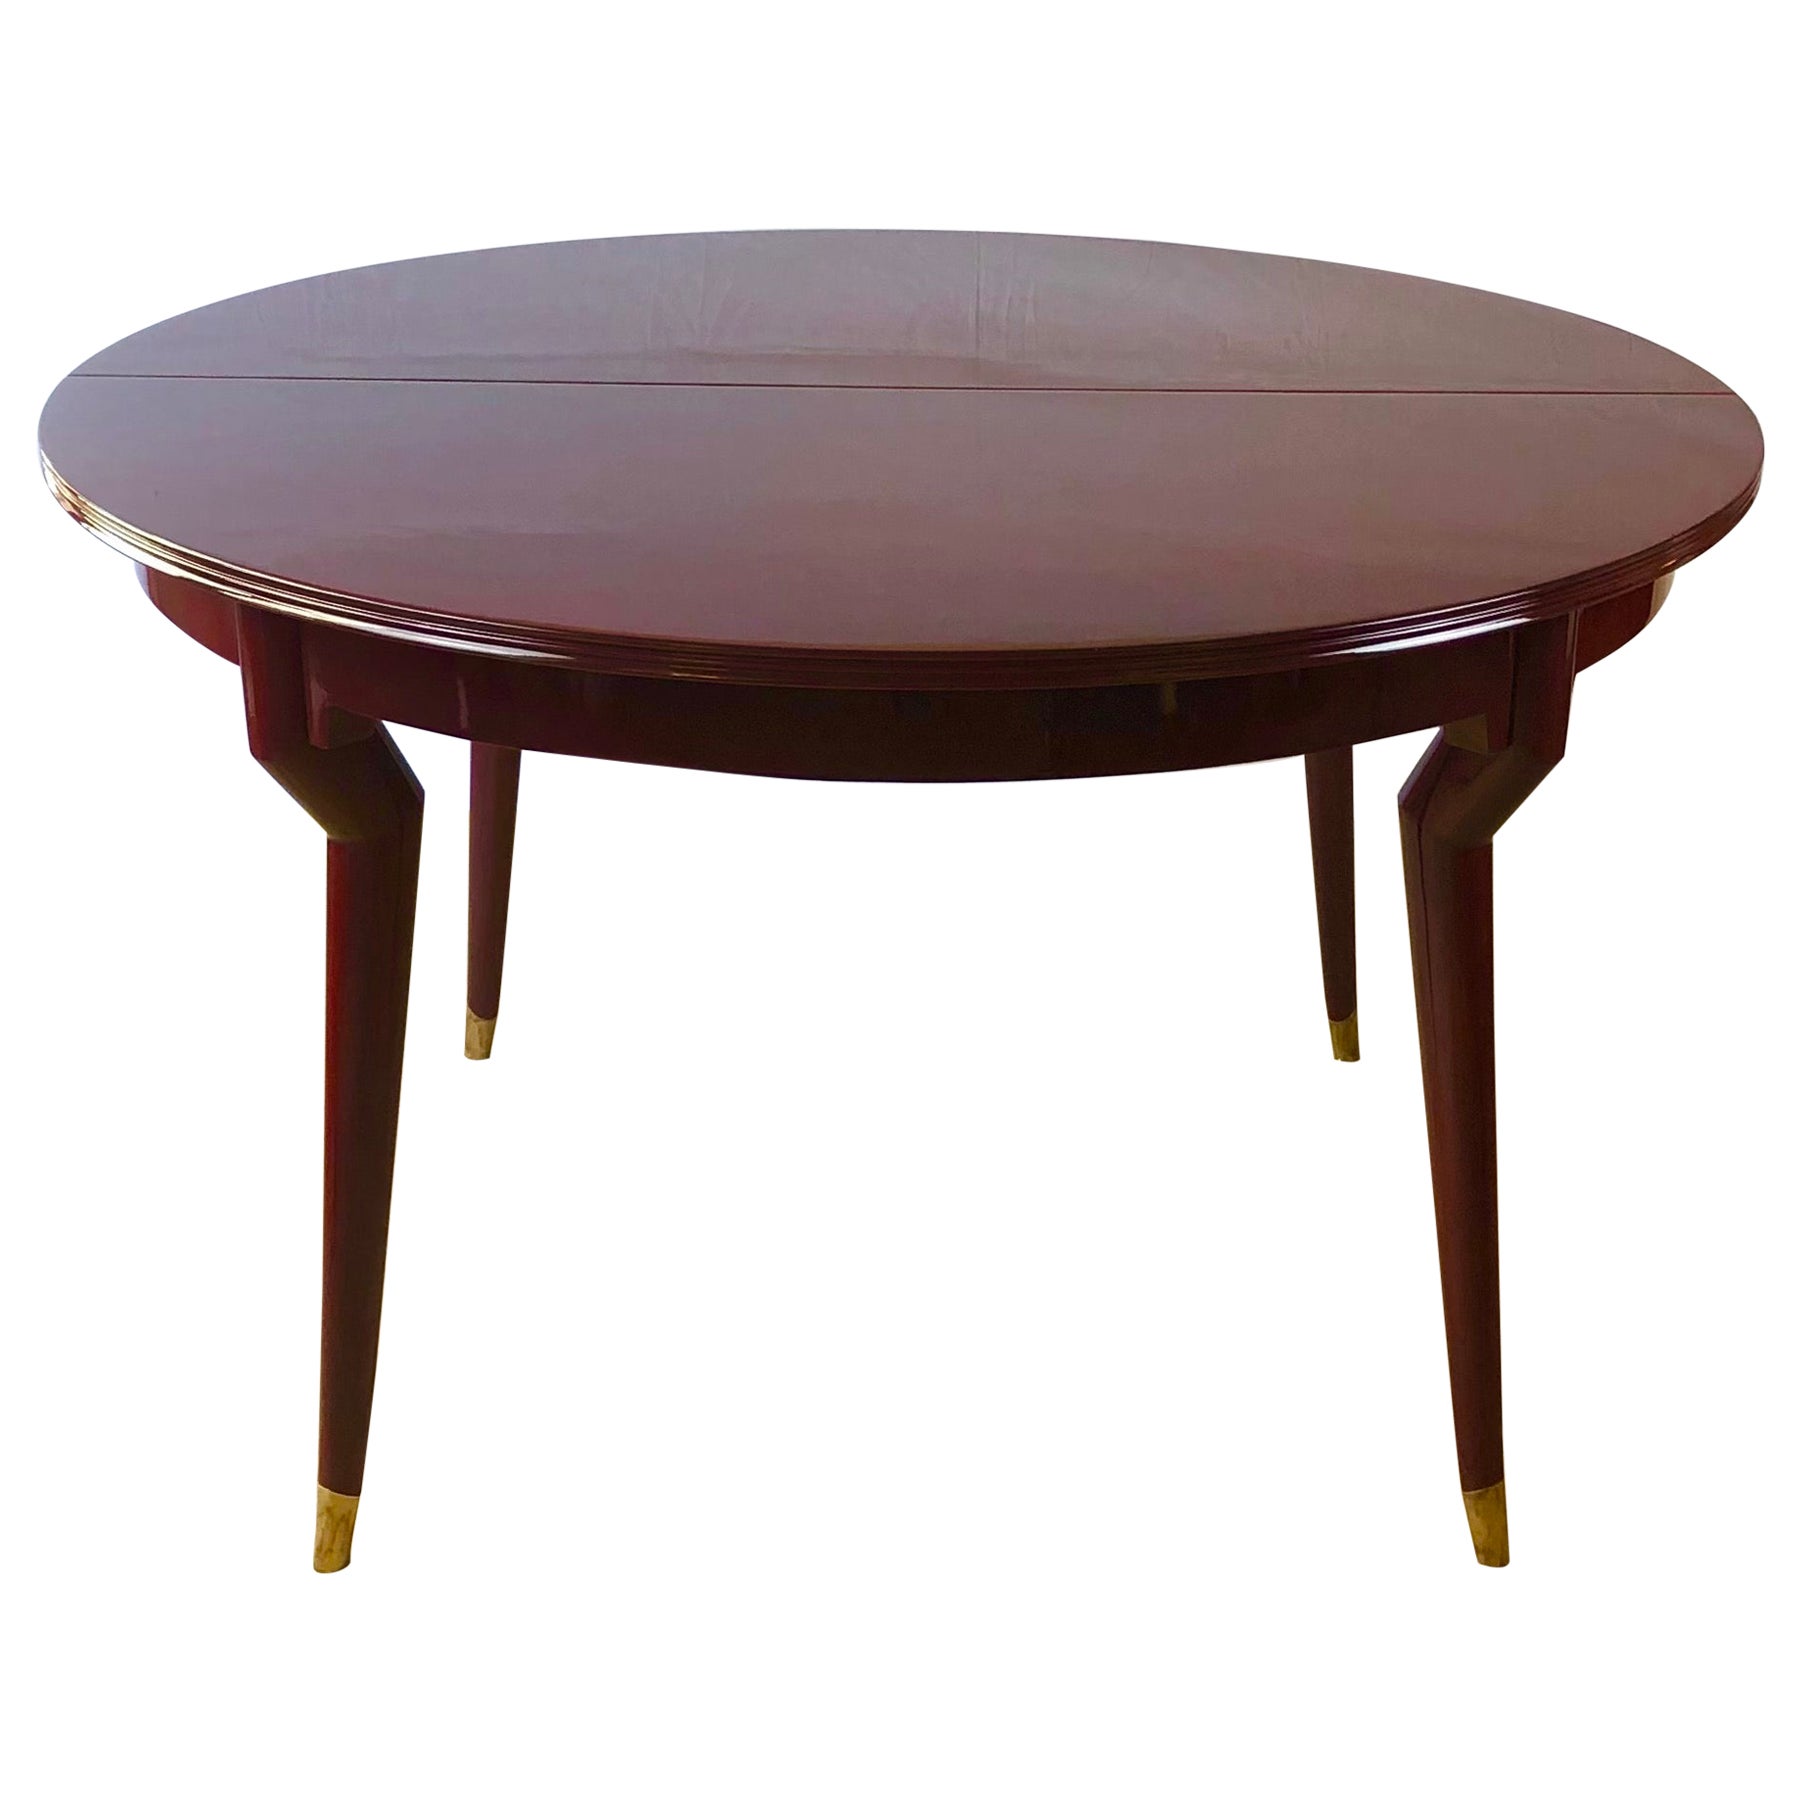 Rare Extendable Italian Dining Table Attributed to Gio Ponti